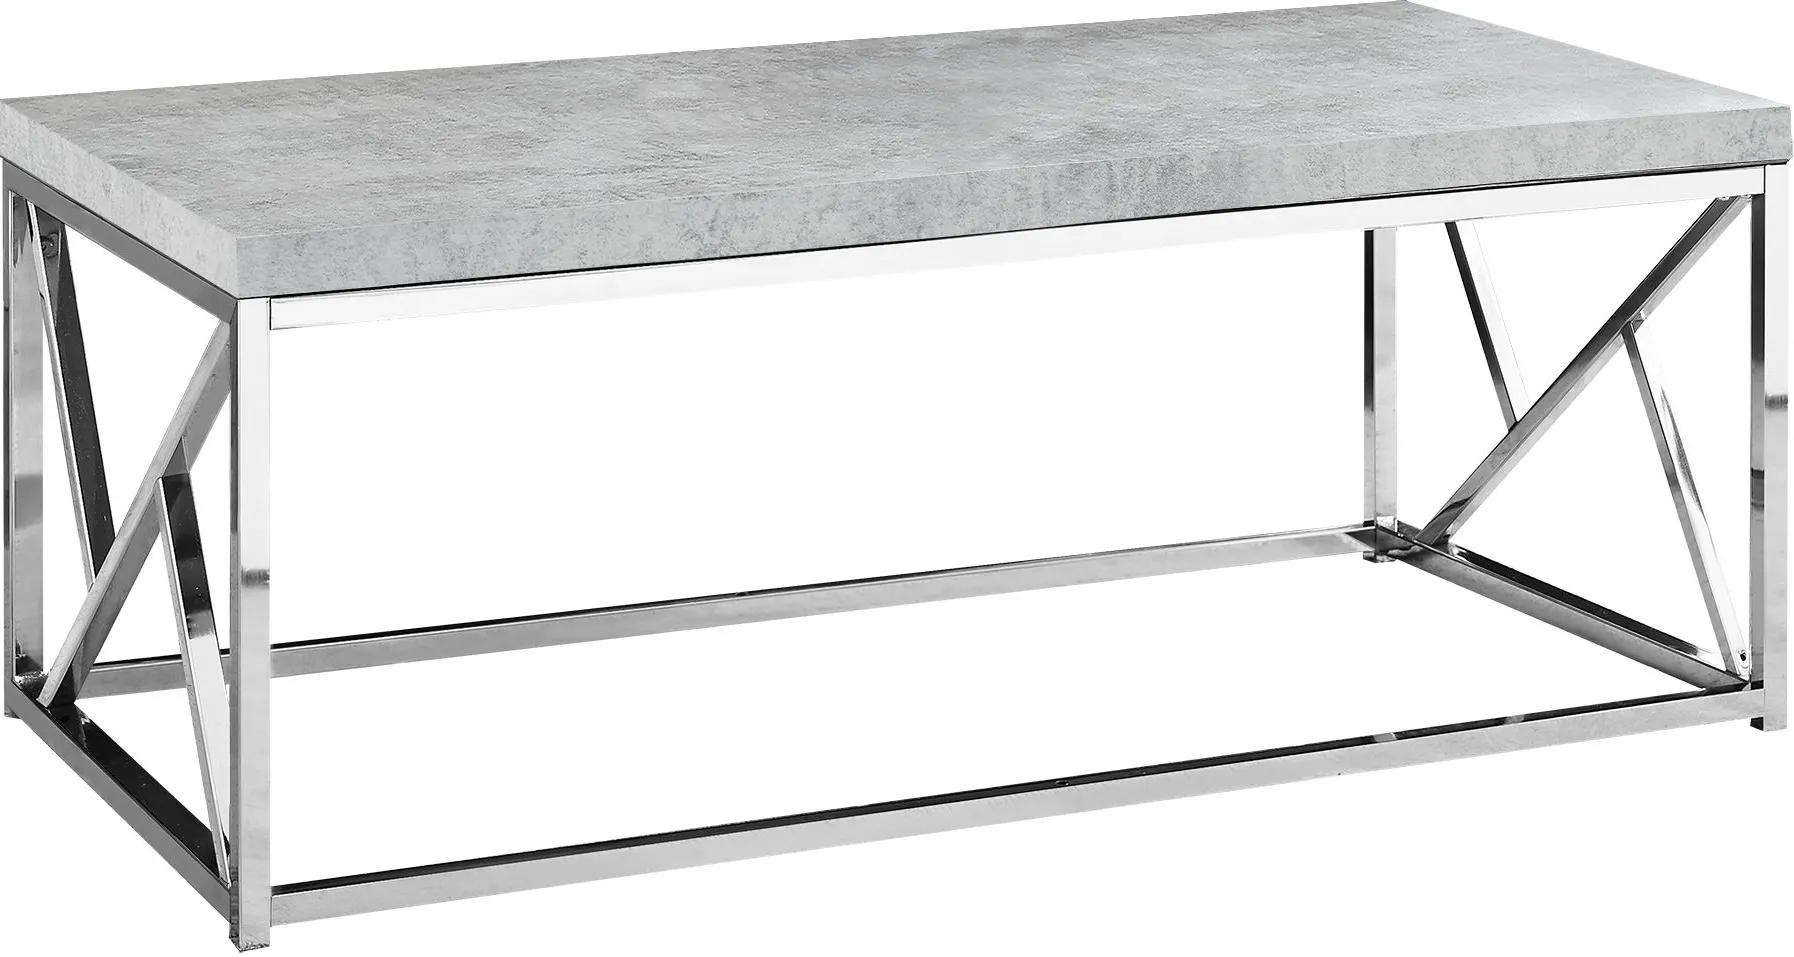 Coffee Table, Accent, Cocktail, Rectangular, Living Room, 48"L, Metal, Laminate, Grey, Chrome, Contemporary, Modern